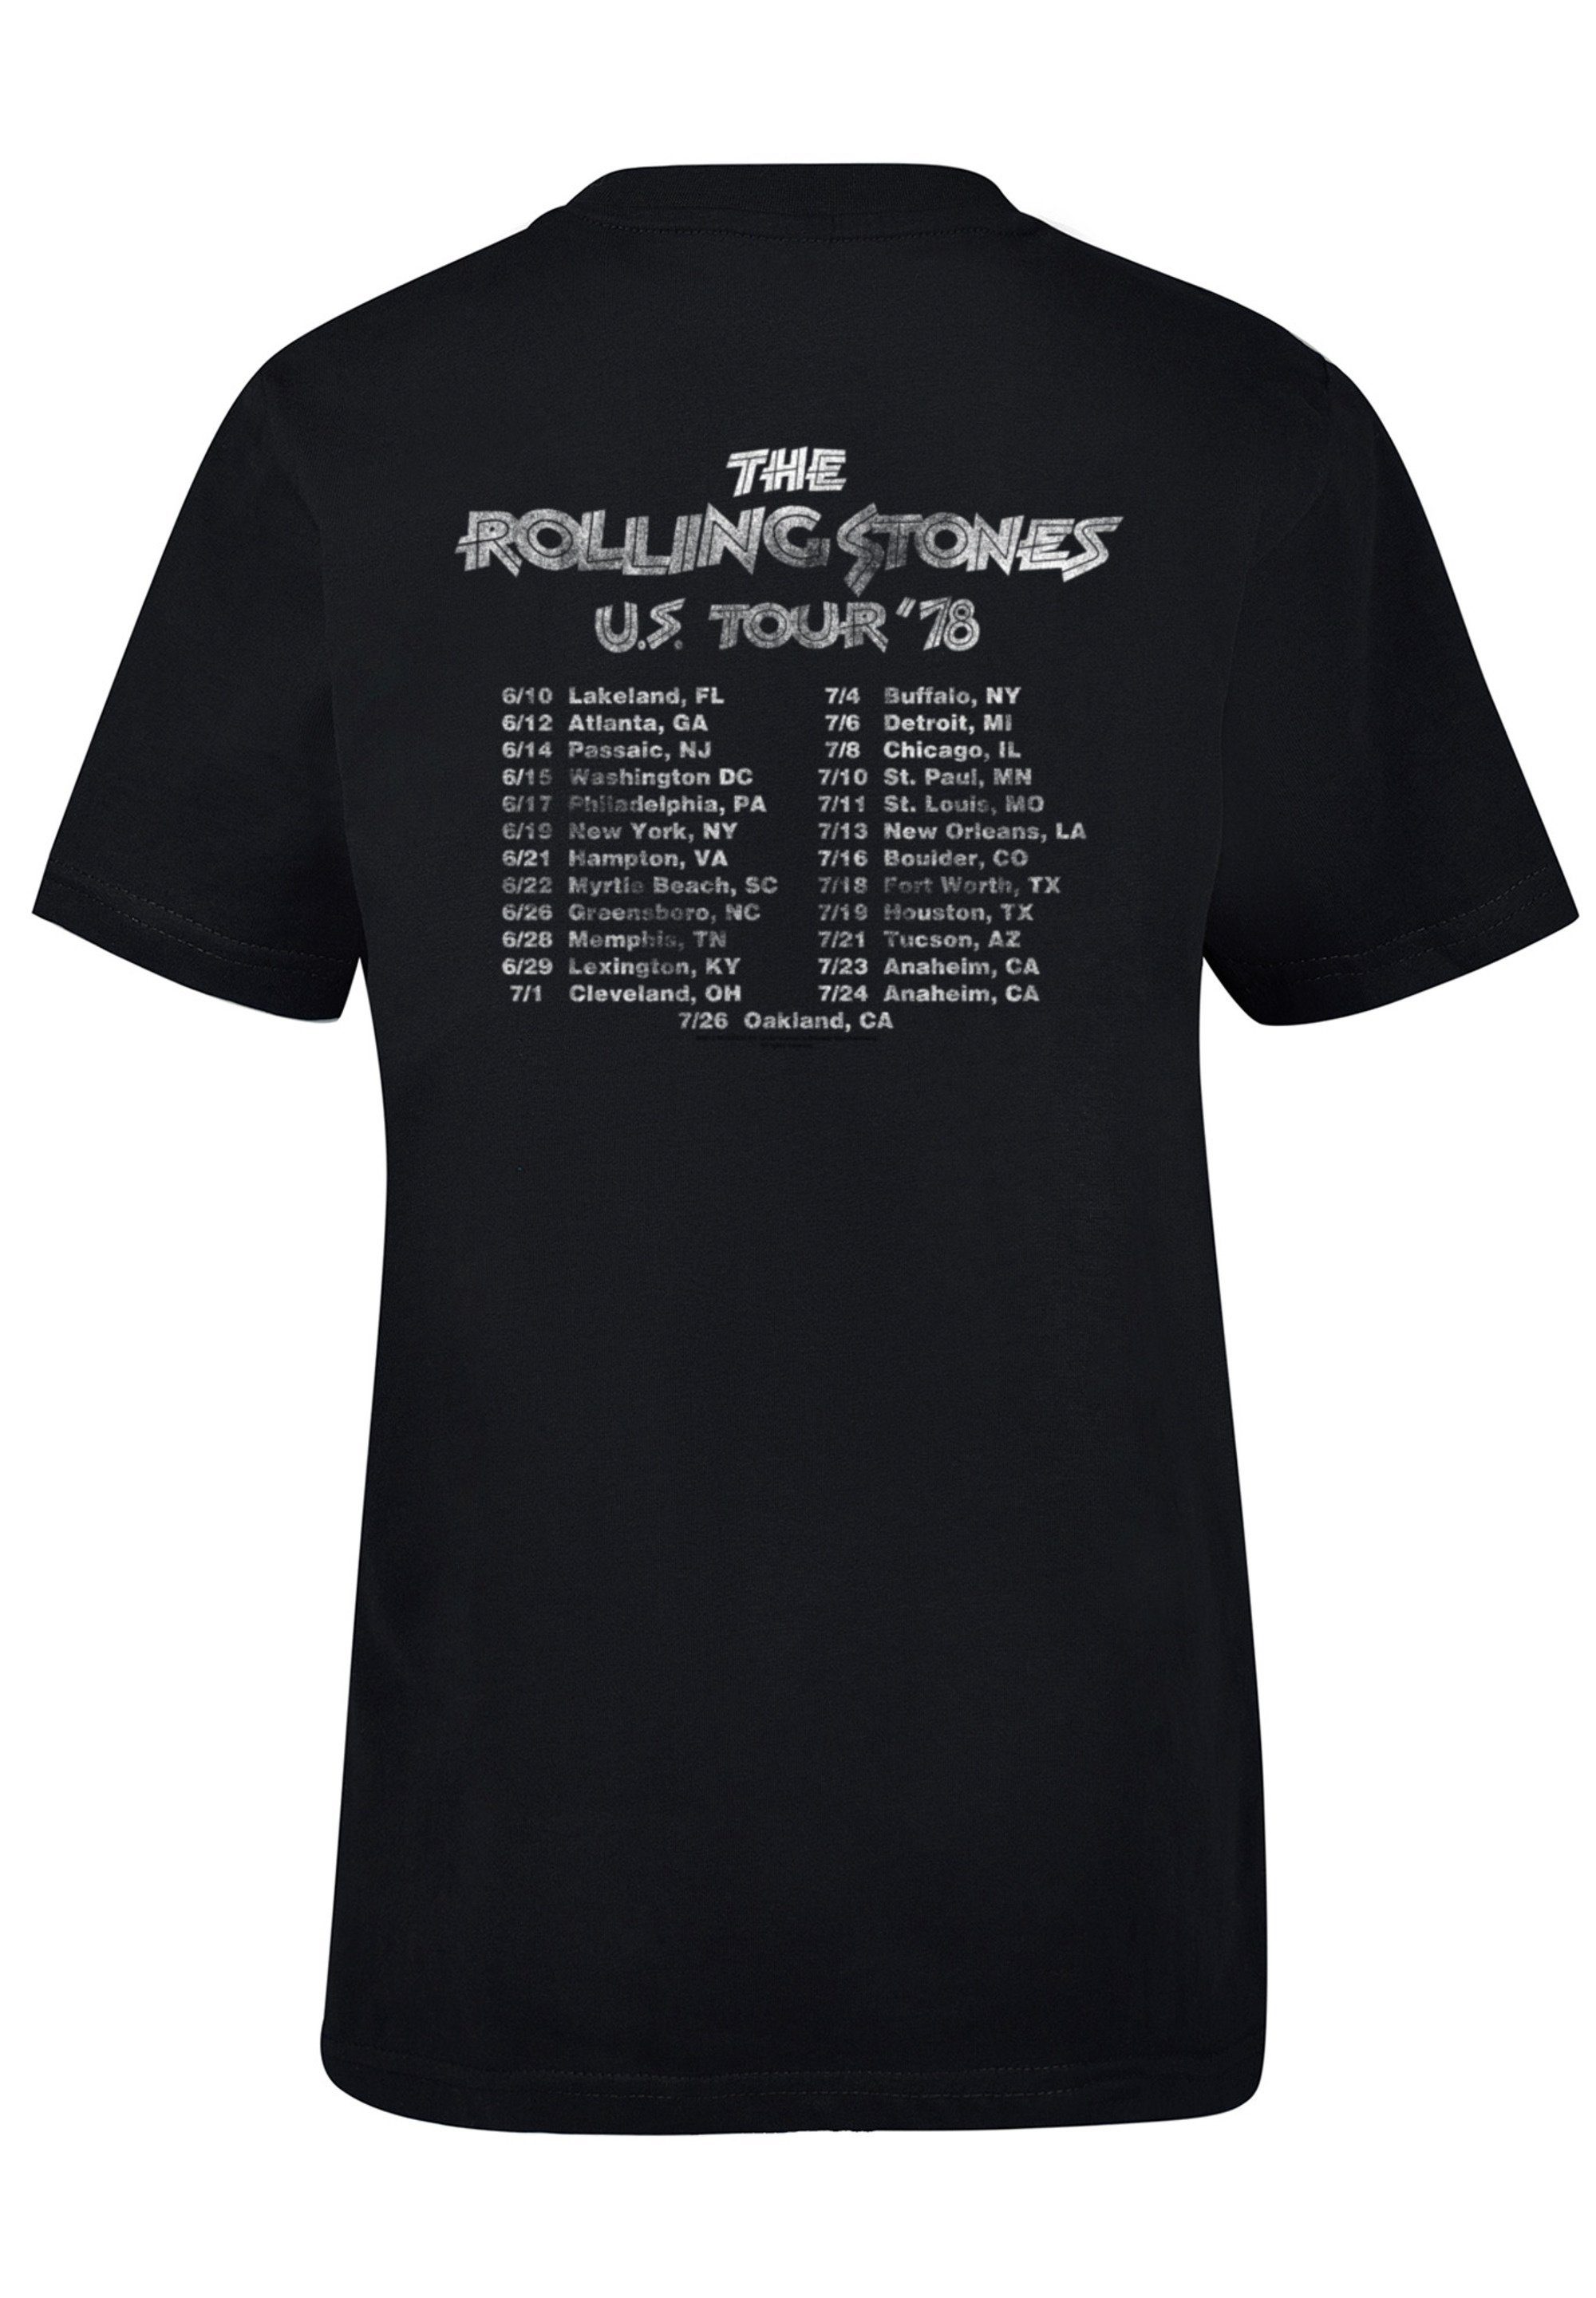 Band Rock '78 Front T-Shirt Stones US F4NT4STIC Rolling Tour The Print